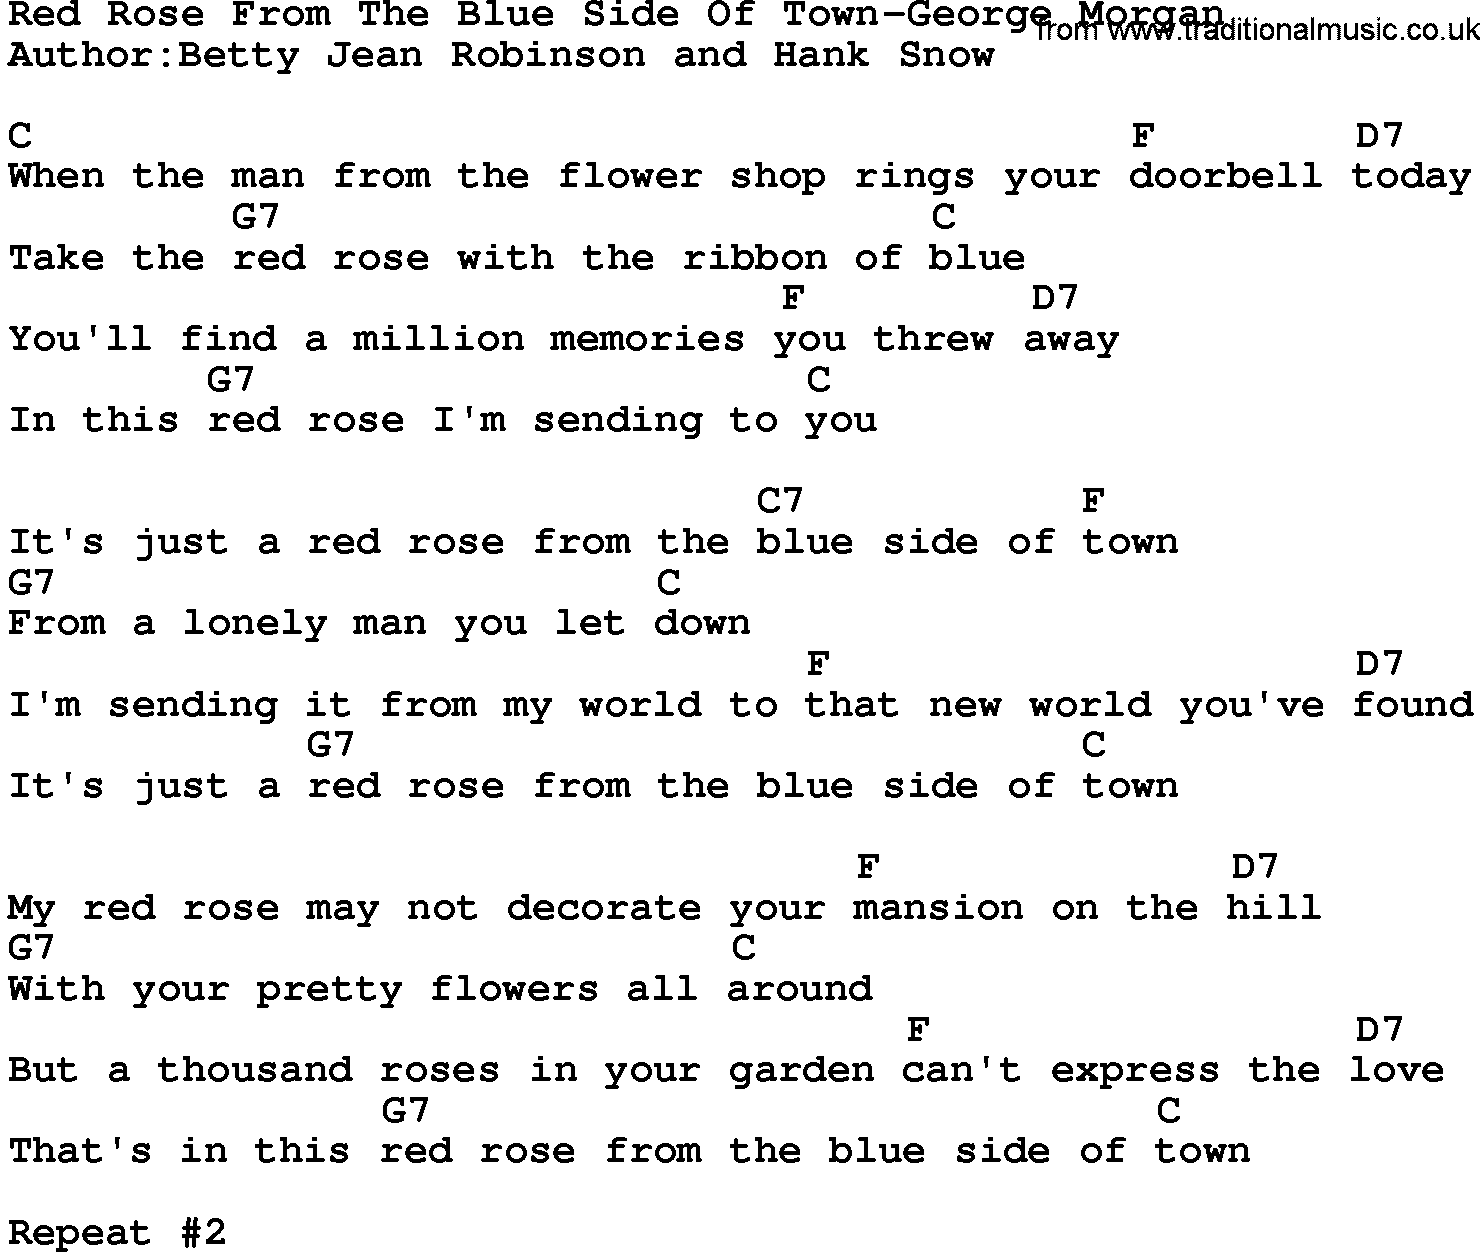 Country music song: Red Rose From The Blue Side Of Town-George Morgan lyrics and chords